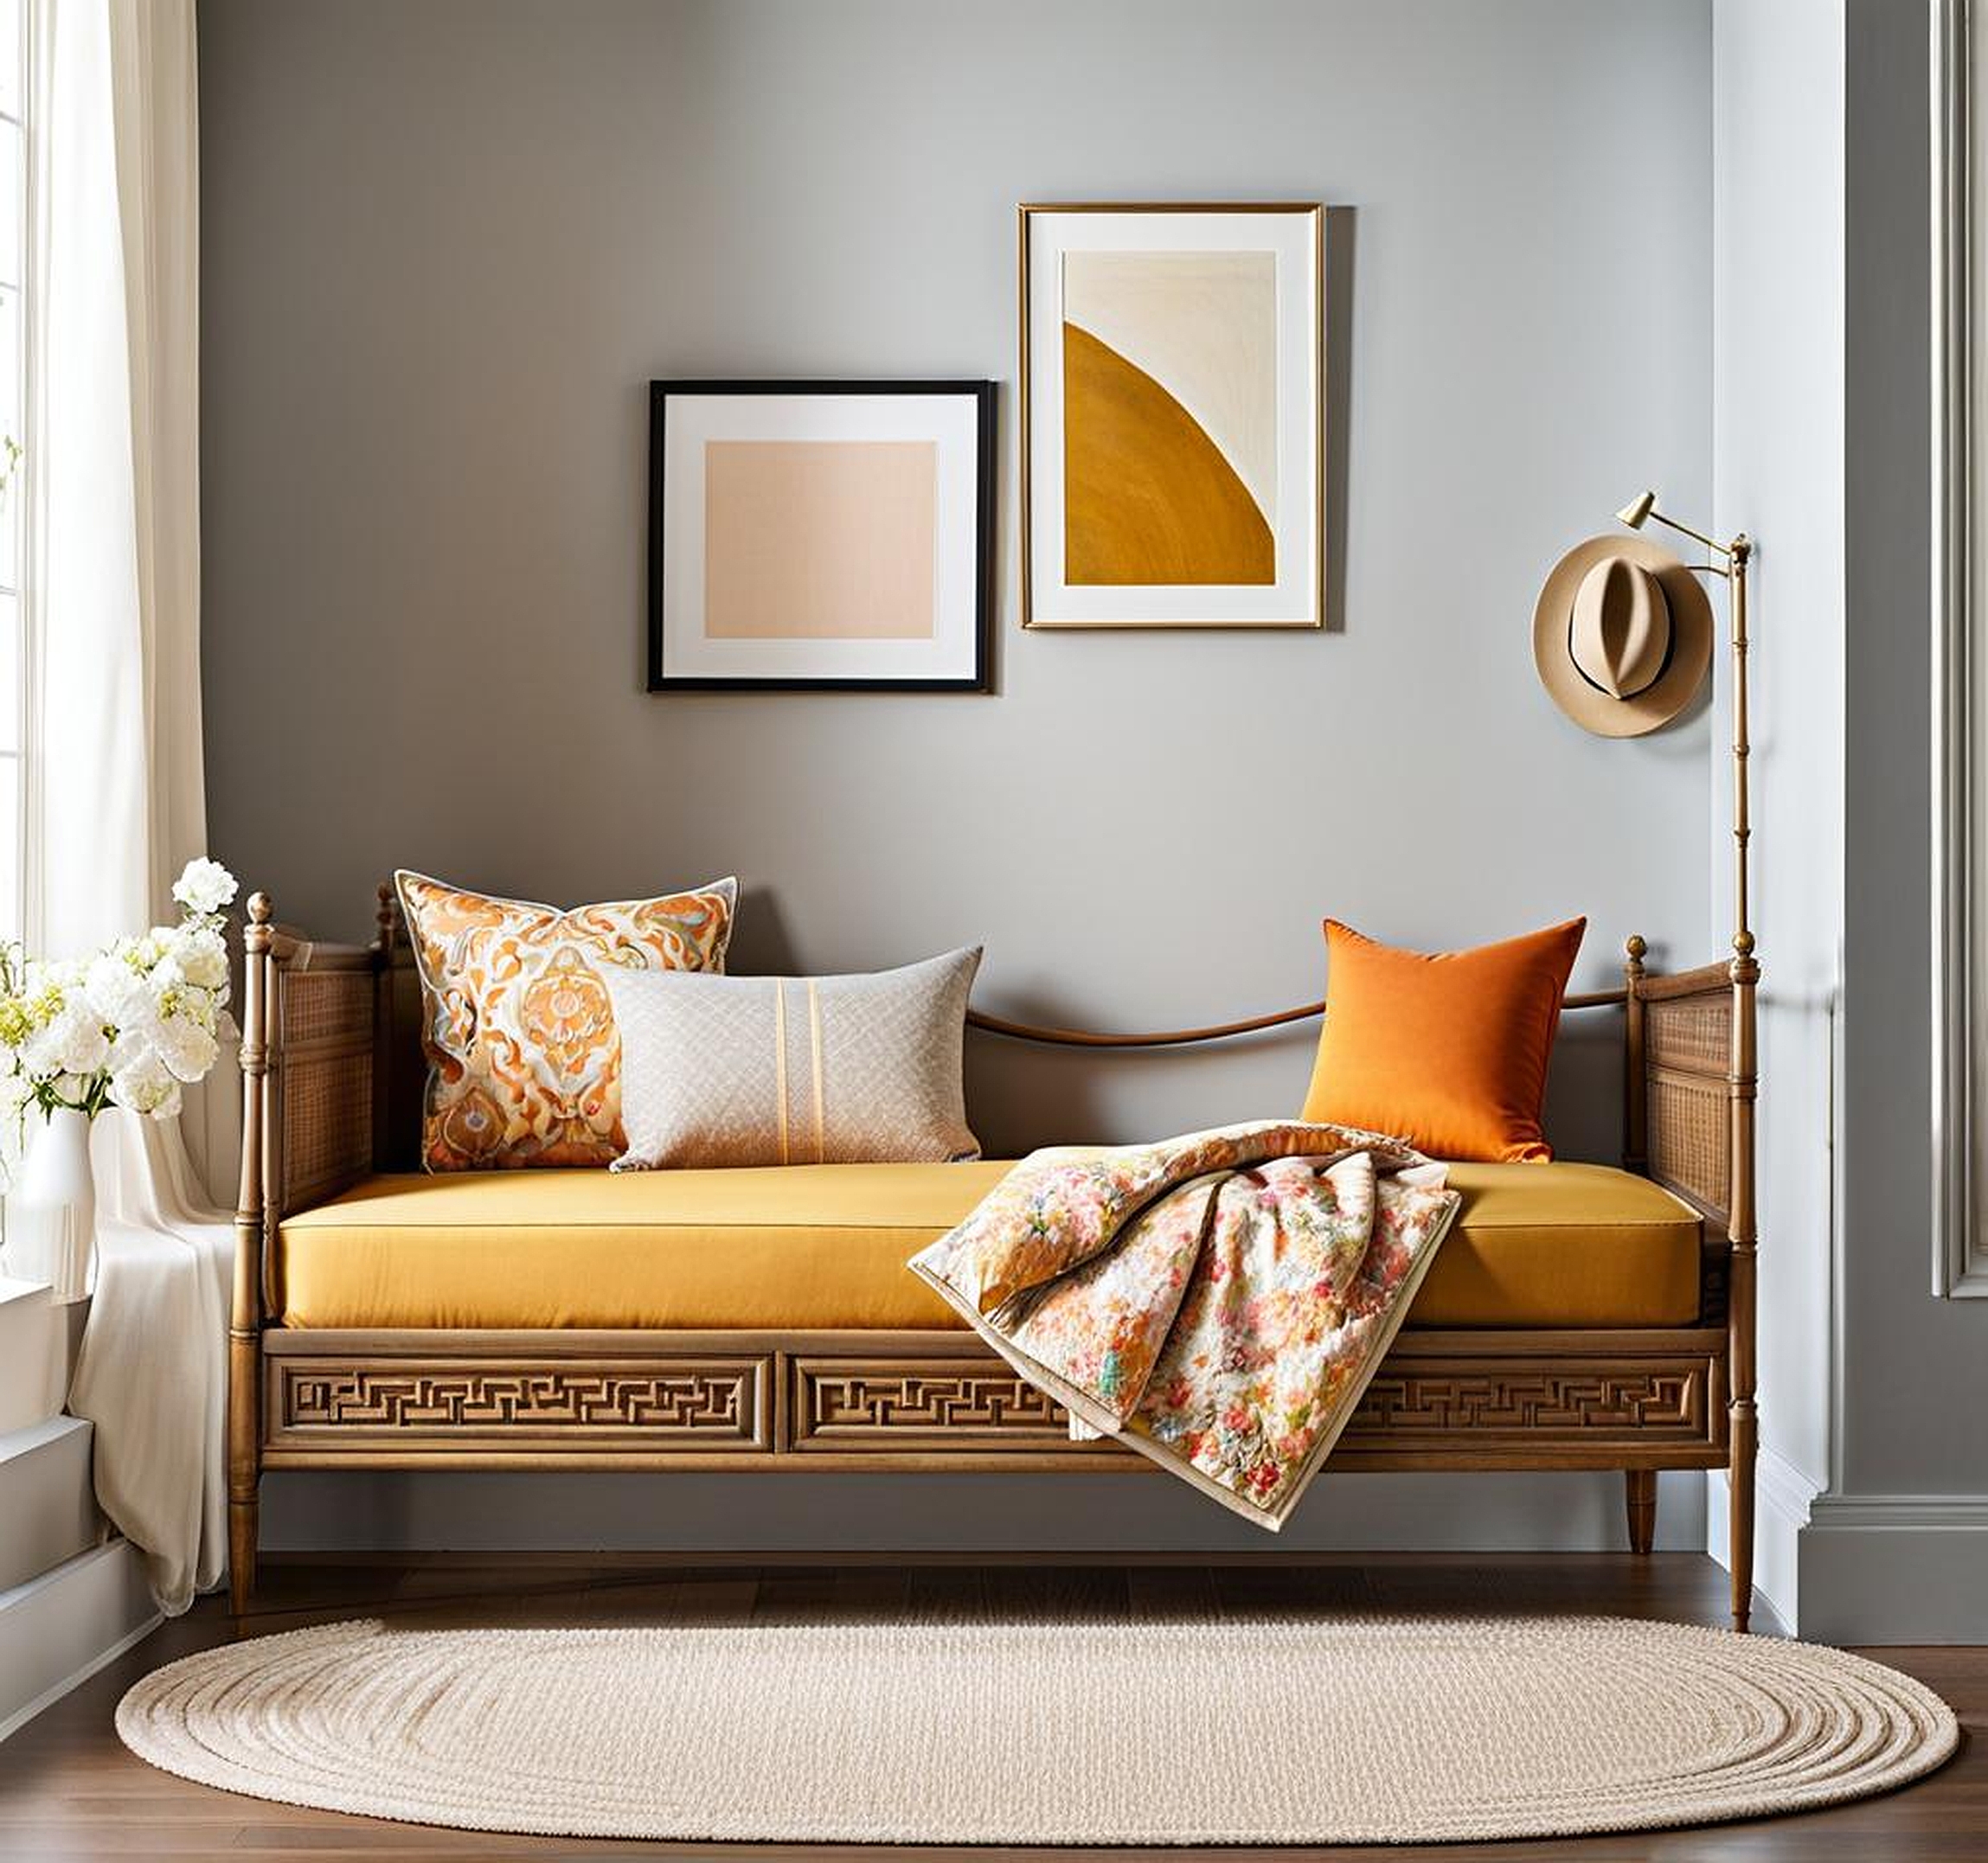 how to decorate a daybed